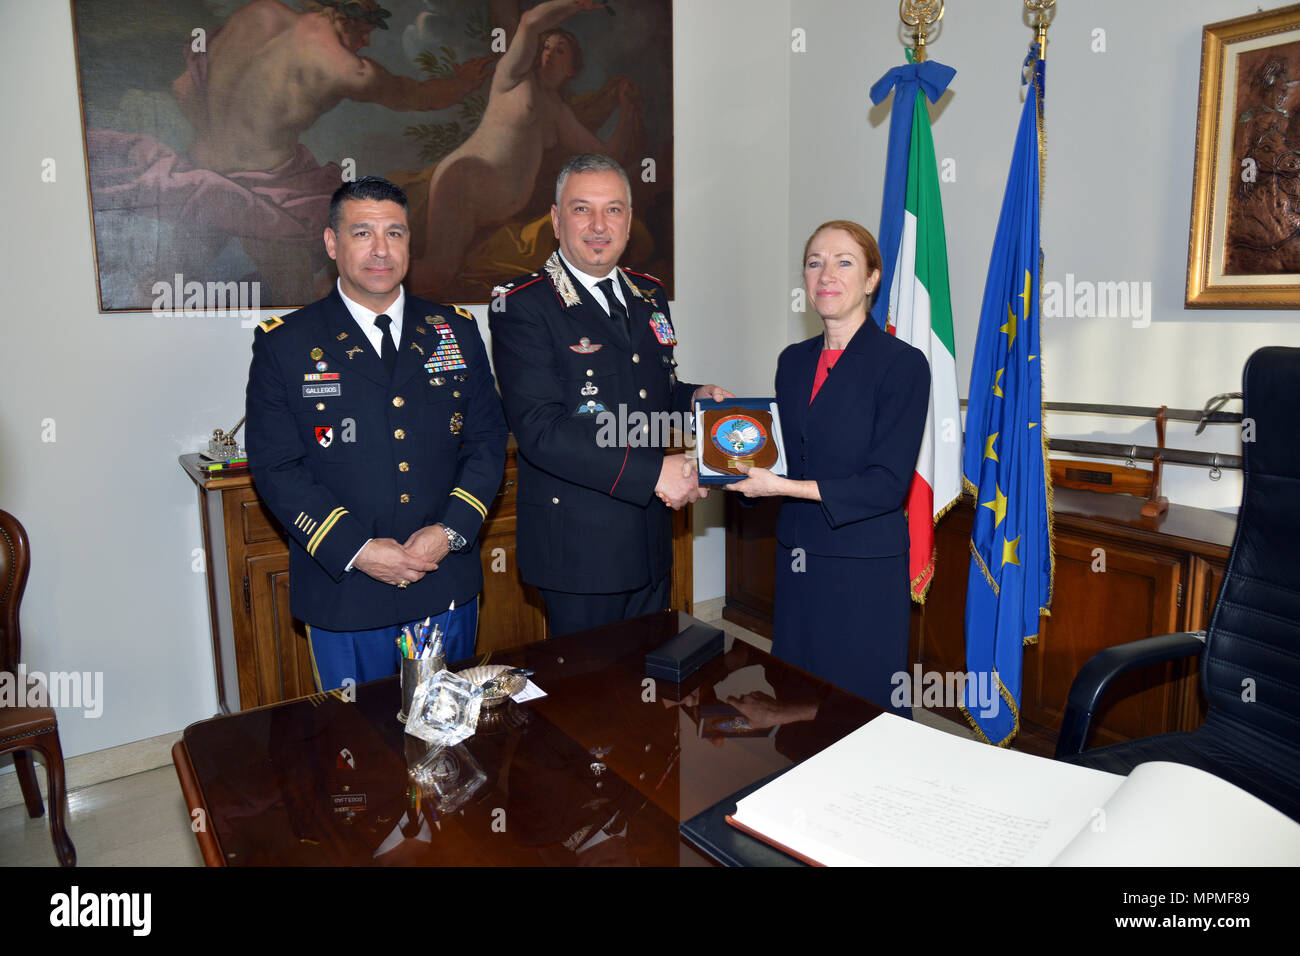 Brig. Gen. Giovanni Pietro Barbano, Center of Excellence for Stability Police Units (CoESPU) director (center) and U.S. Army Col. Darius S. Gallegos, CoESPU deputy director (left), presents  Carabinieri CoESPU crest to Ms. Kelly Degnan, Charge’ d’Affaires ad interim U.S. Embassy & Consulates Italy,  during visit at Center of Excellence for Stability Police Units (CoESPU) Vicenza, Italy, Mar. 30, 2017.(U.S. Army Photo by Visual Information Specialist Antonio Bedin/released) Stock Photo